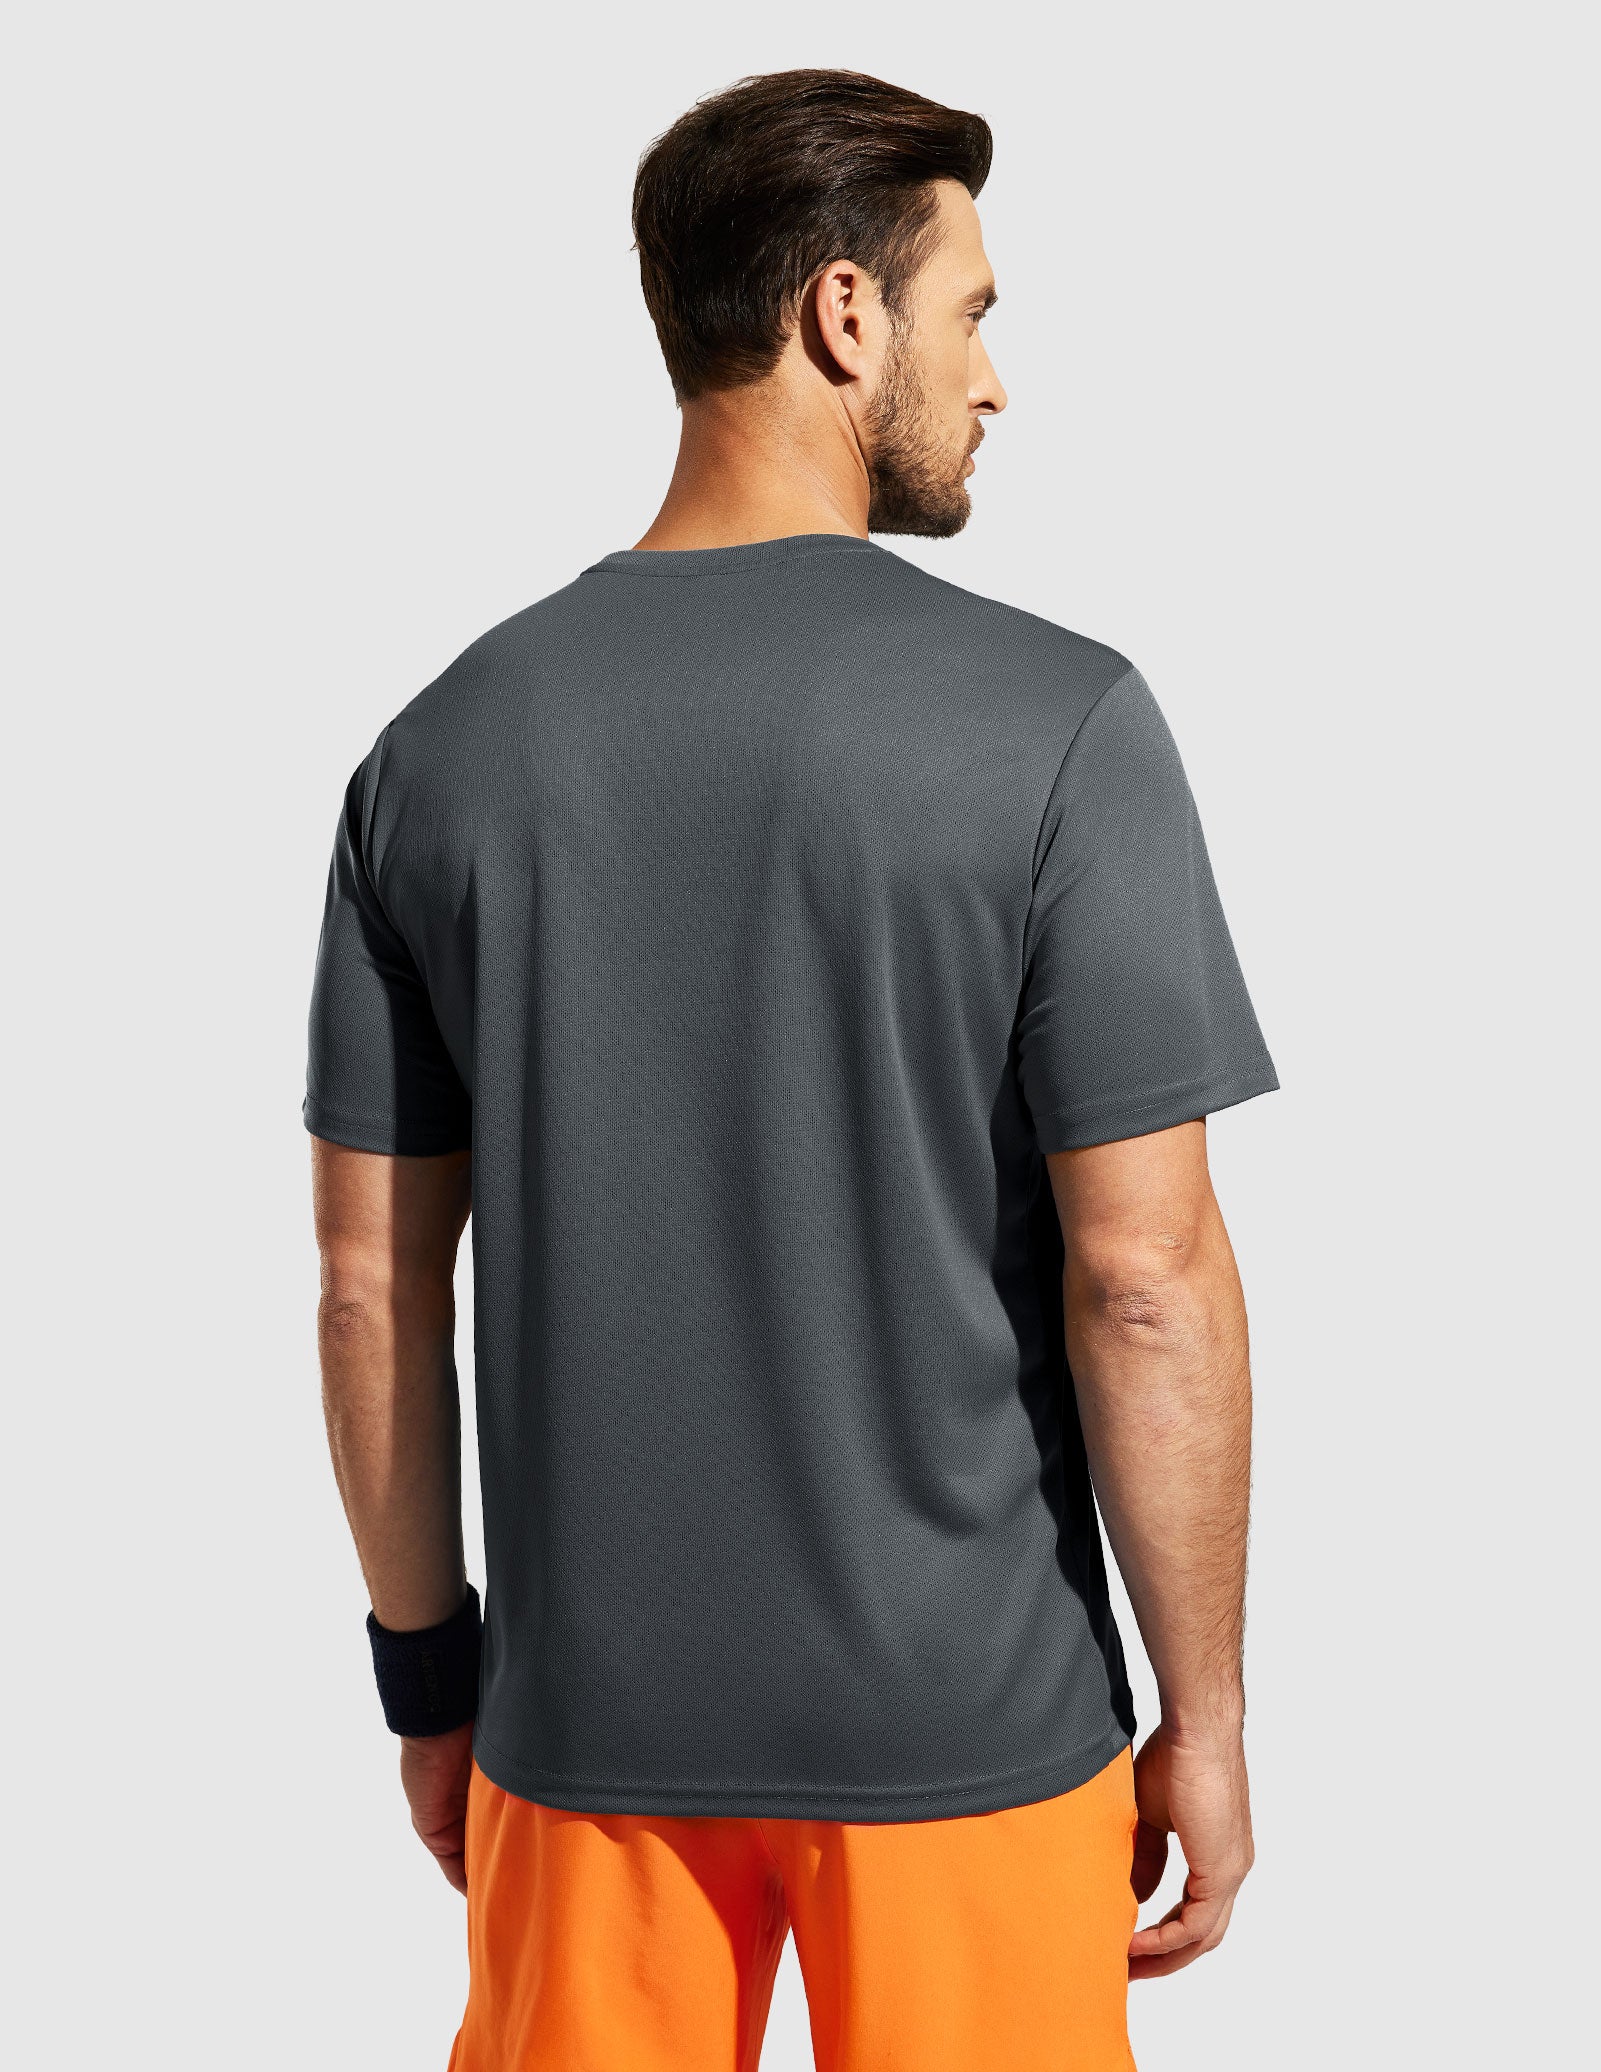 Men's Dry Fit Workout T-shirts for Gym Athletic Running